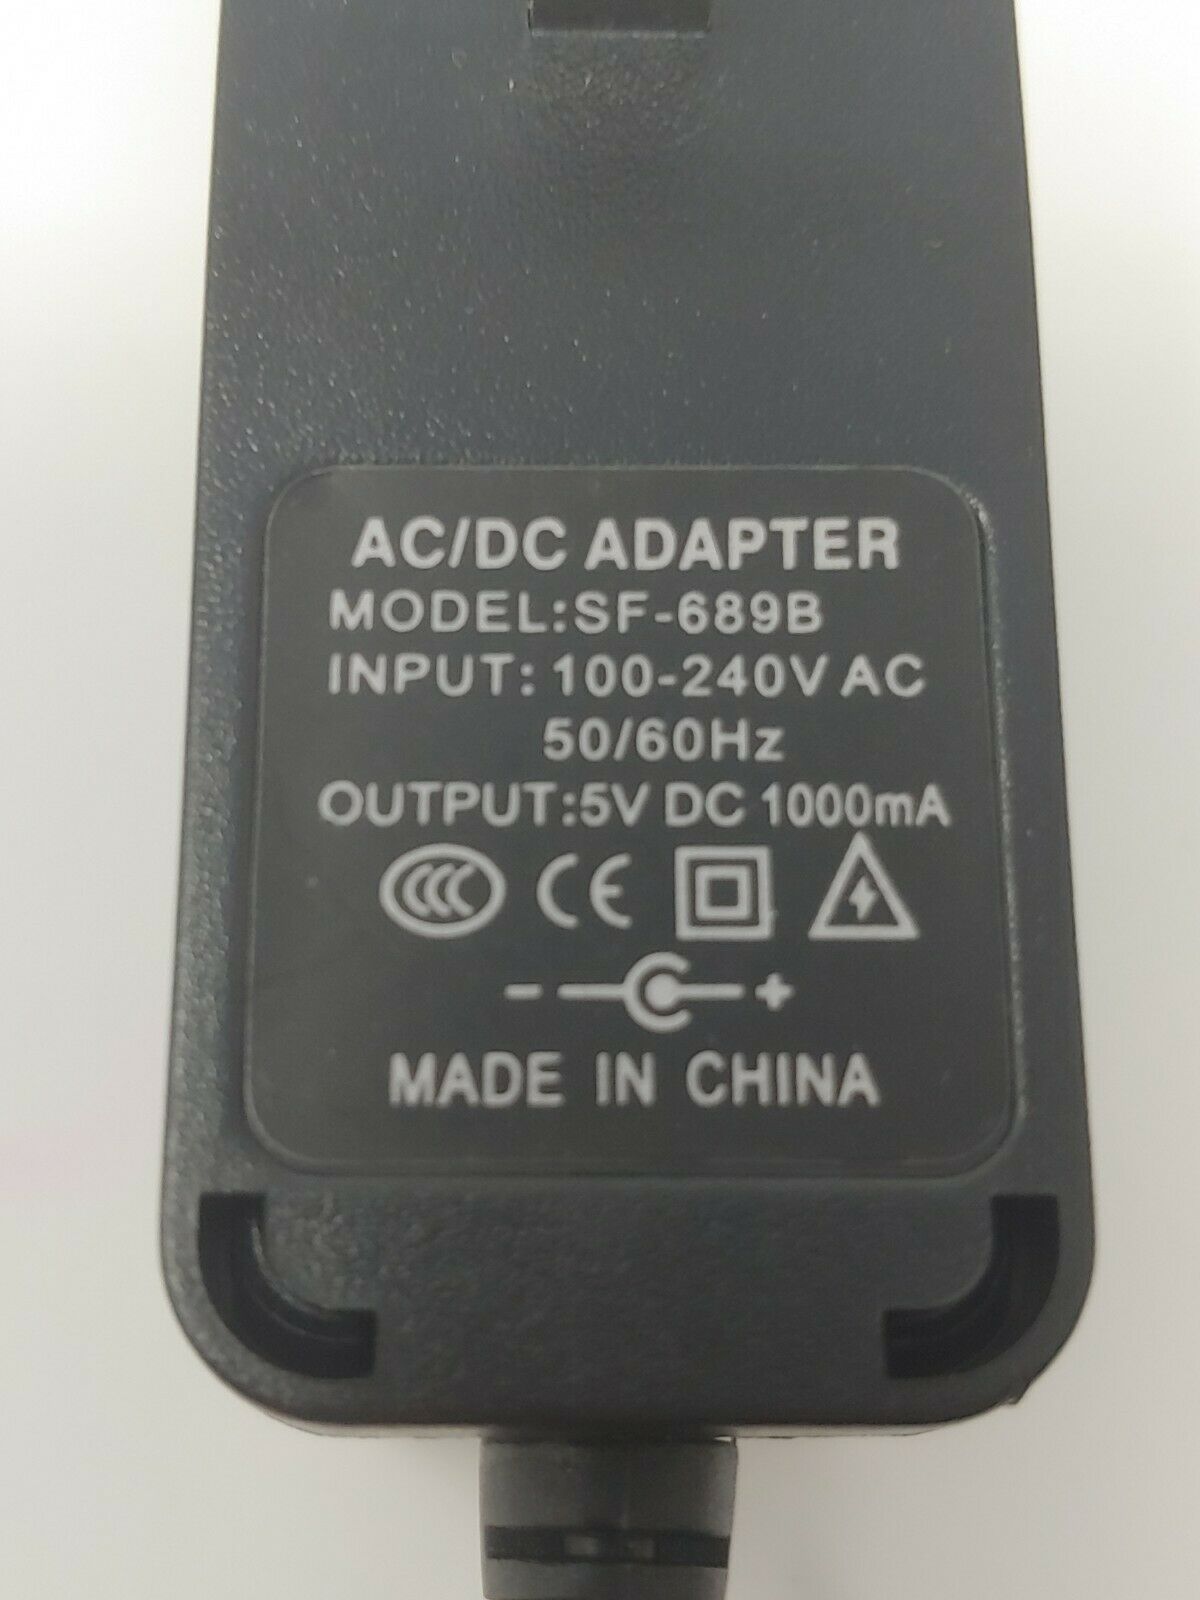 New 5V DC 1000mA AC Adapter For SF-689 SF-689B Power Supply Cord Wall Charger PSU